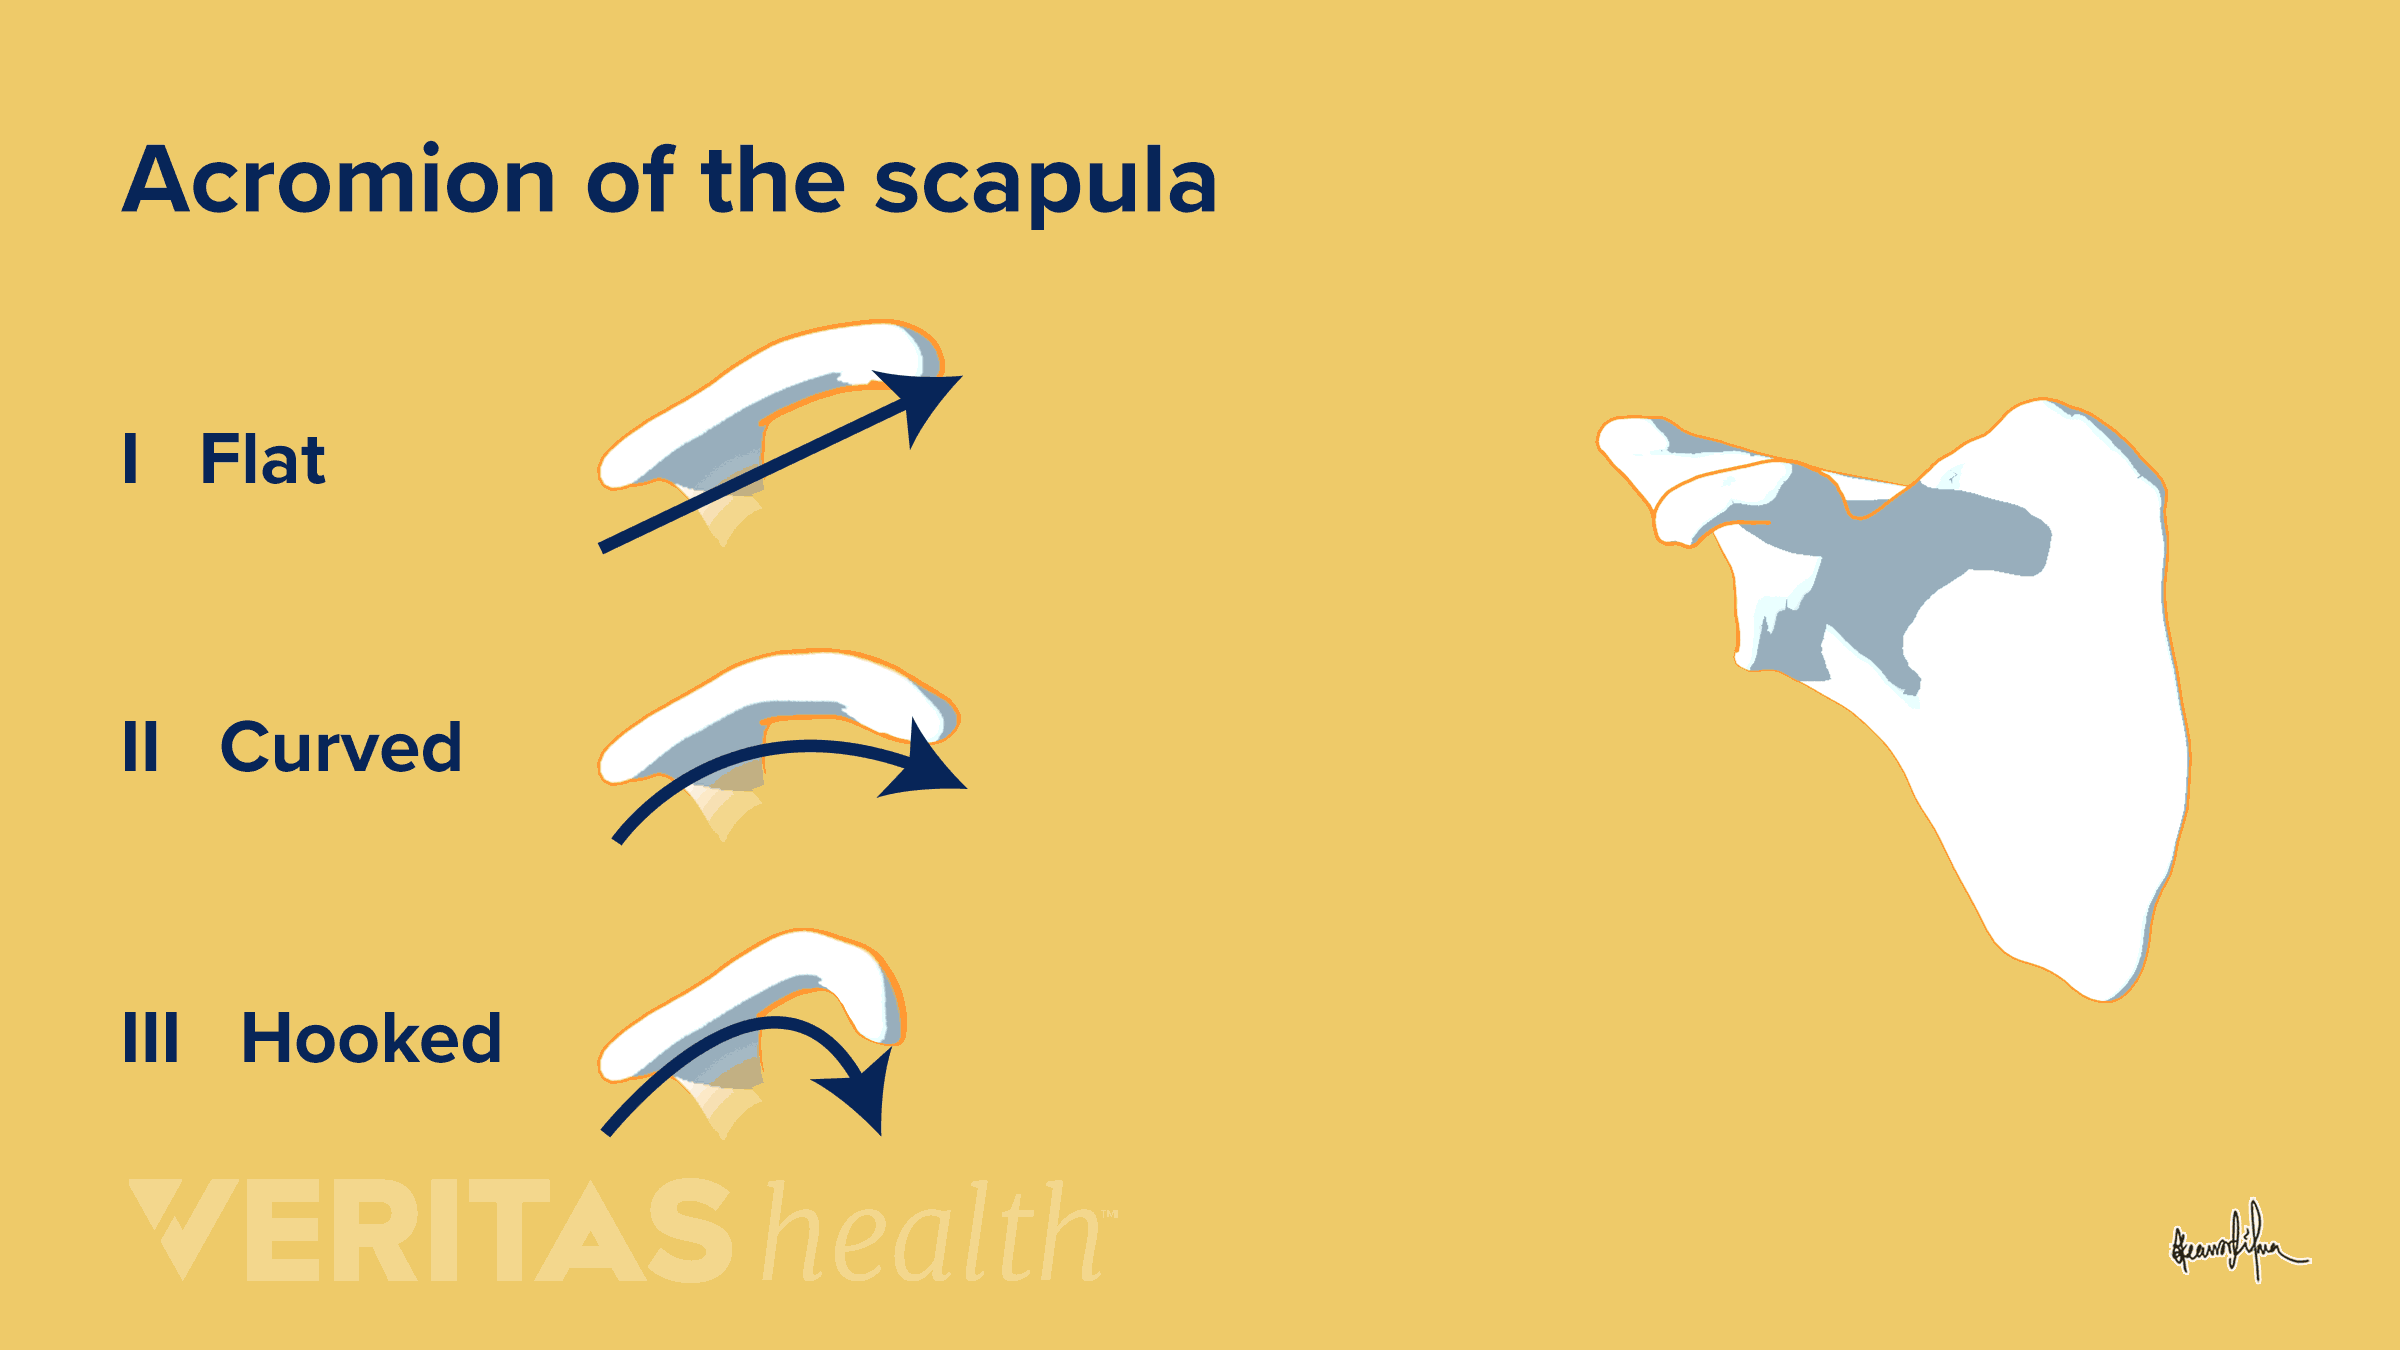 Animation showing the different shapes of the acromion